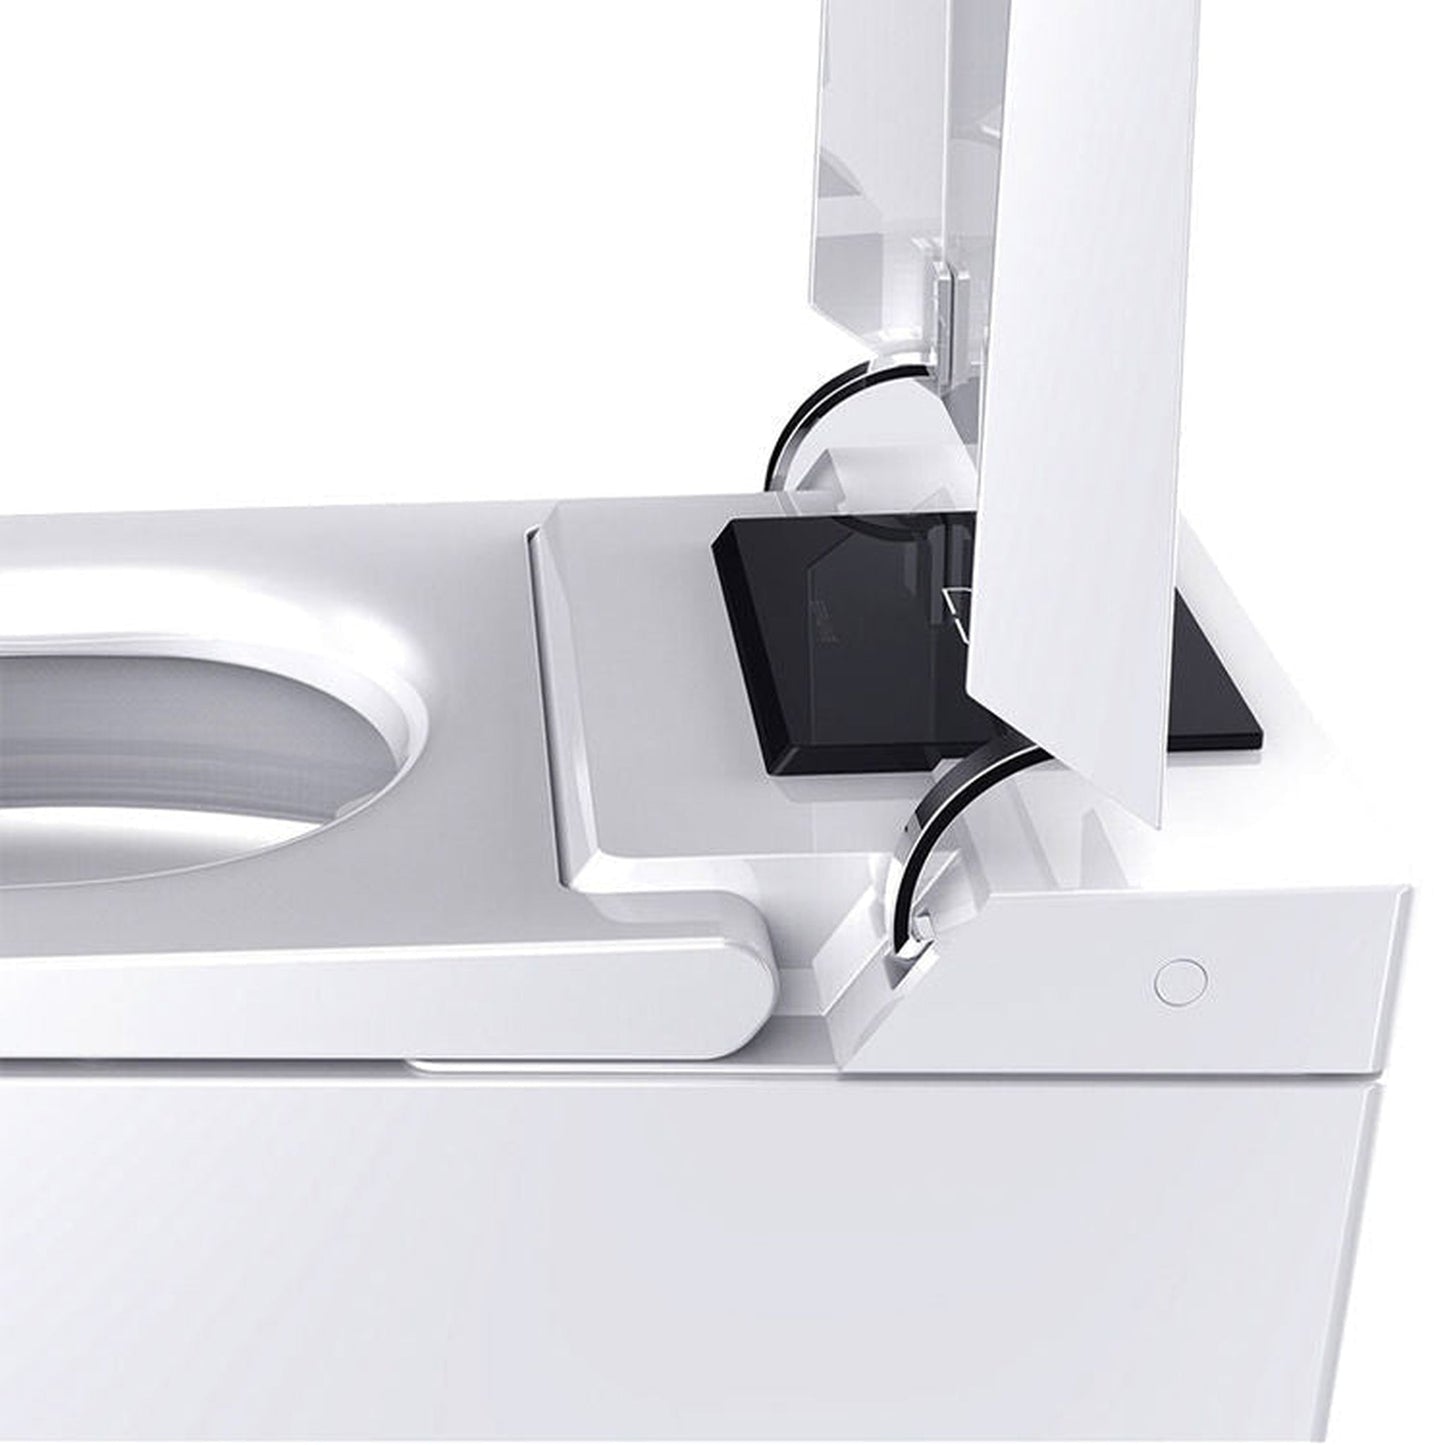 Trone Nobelet Elongated Classic White Luxury Toilet With Smart Bidet and Remote Control